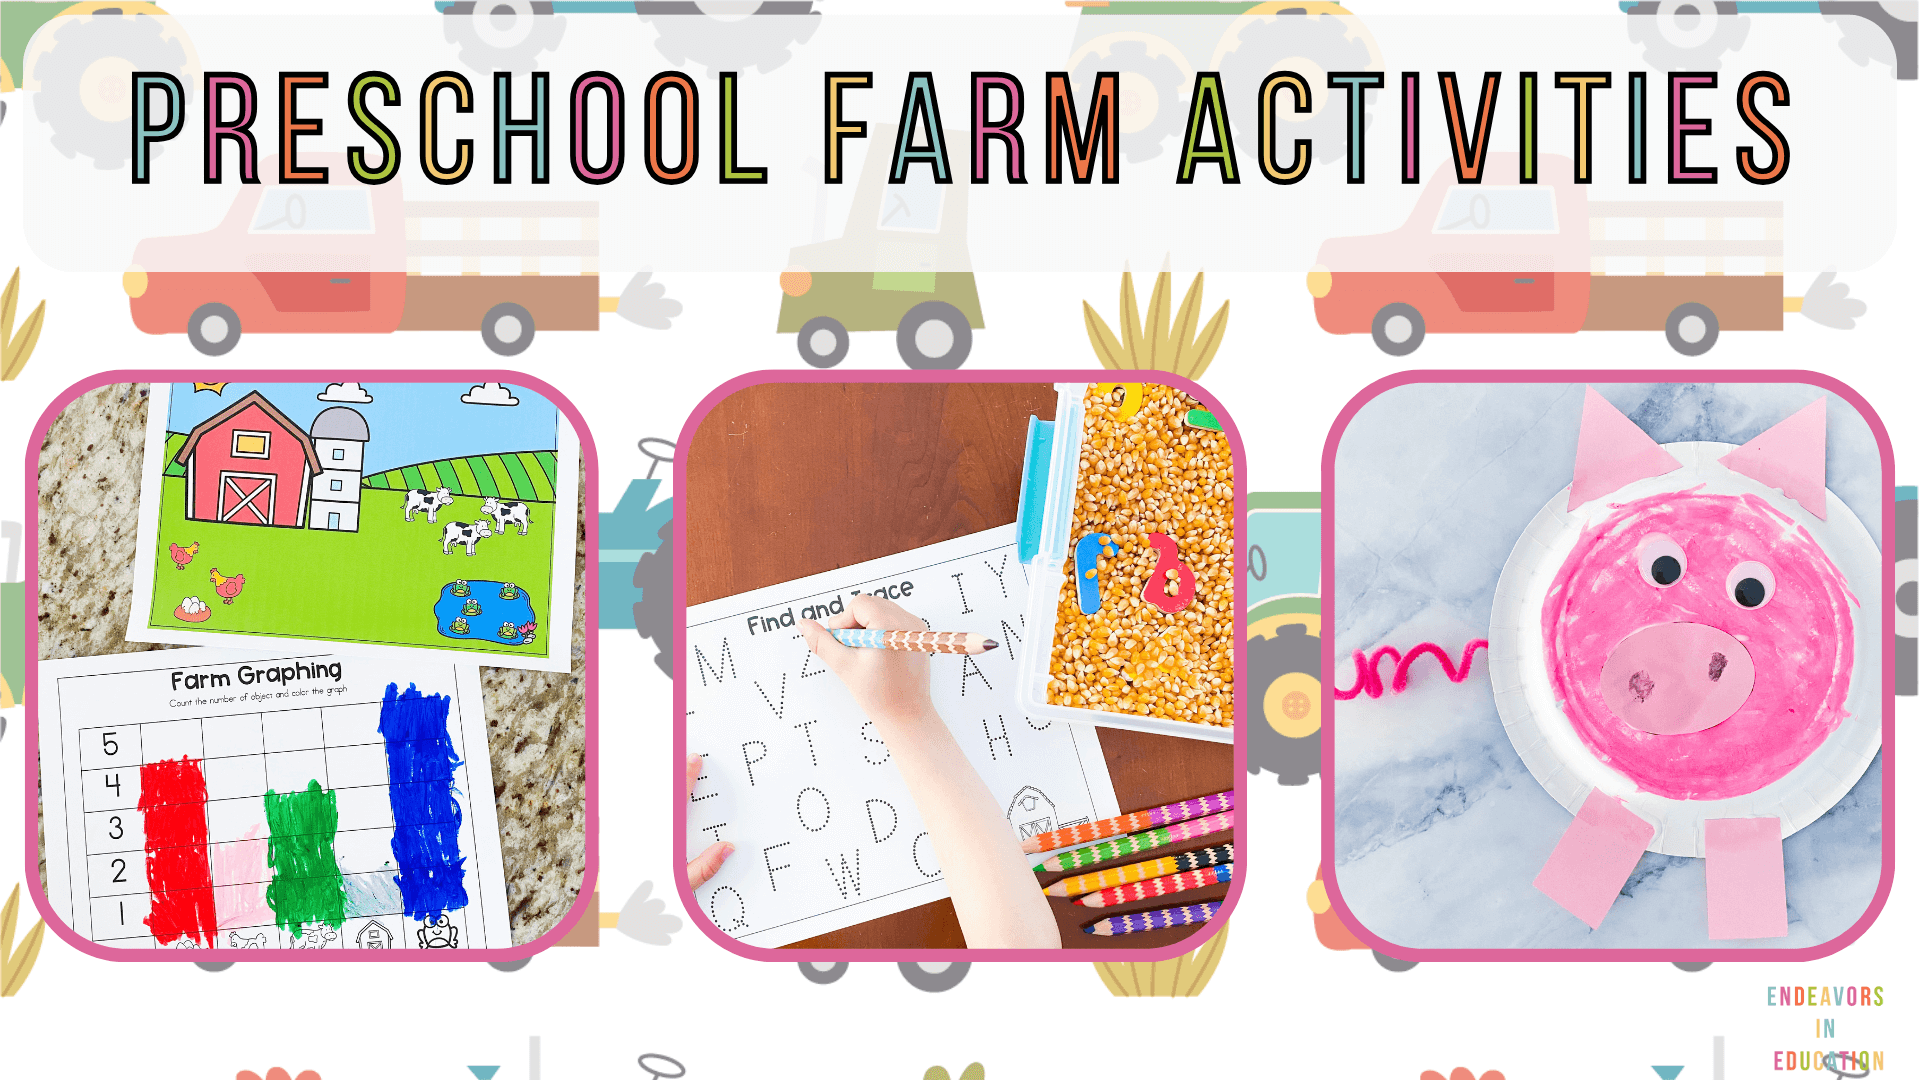 Image says Preschool Farm Activities and there are images of a math activity, sensory bin seek and find activity, and a pig paper plate craft